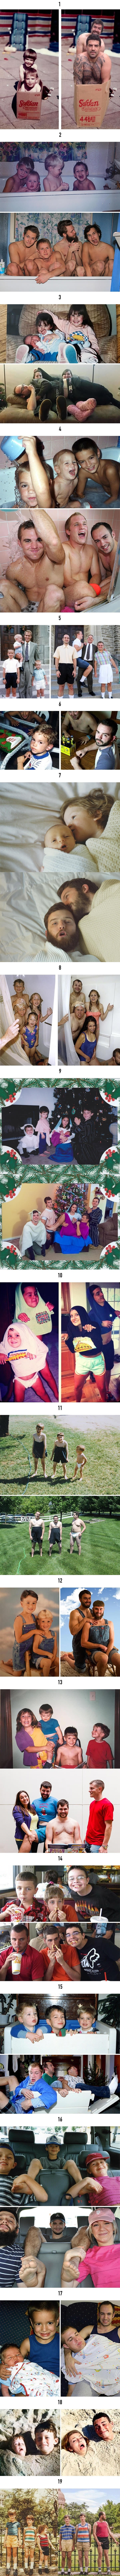 Siblings masterfully recreate their childhood photos